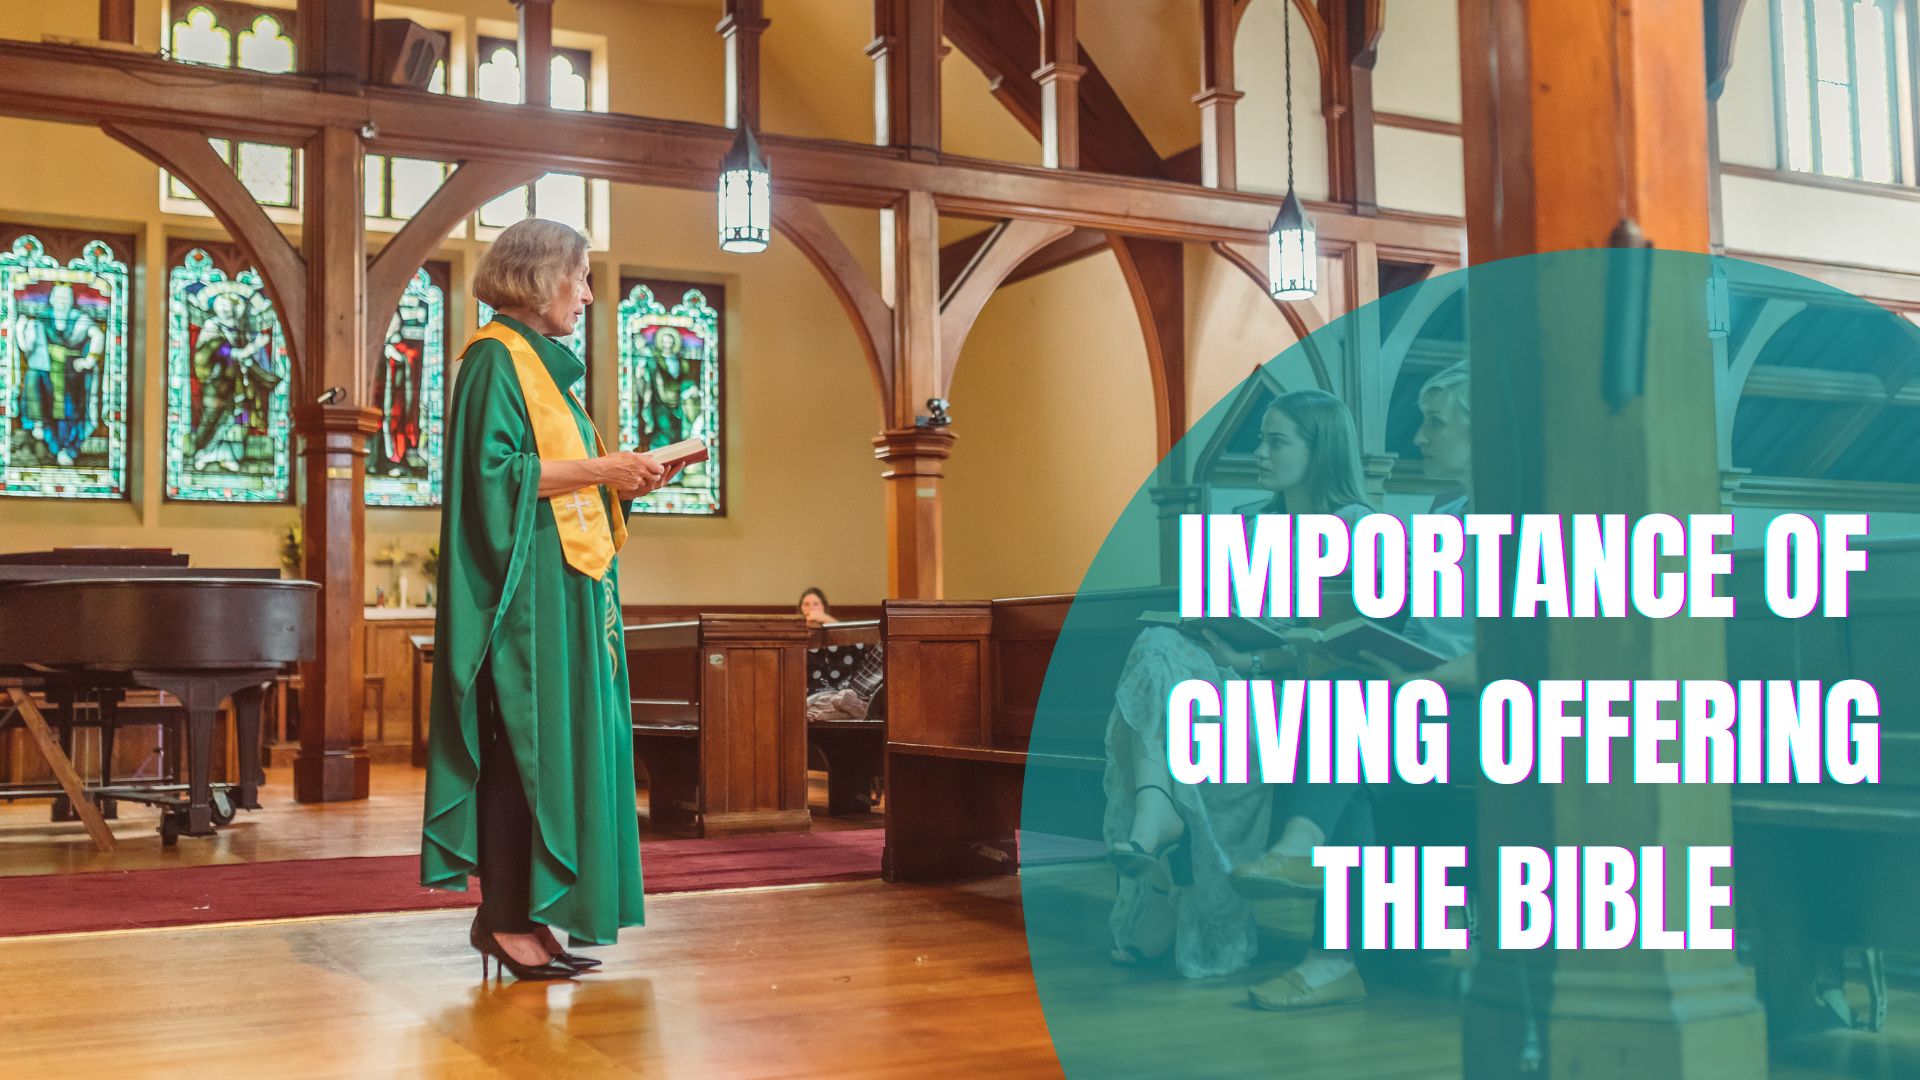 Importance of giving offering in church